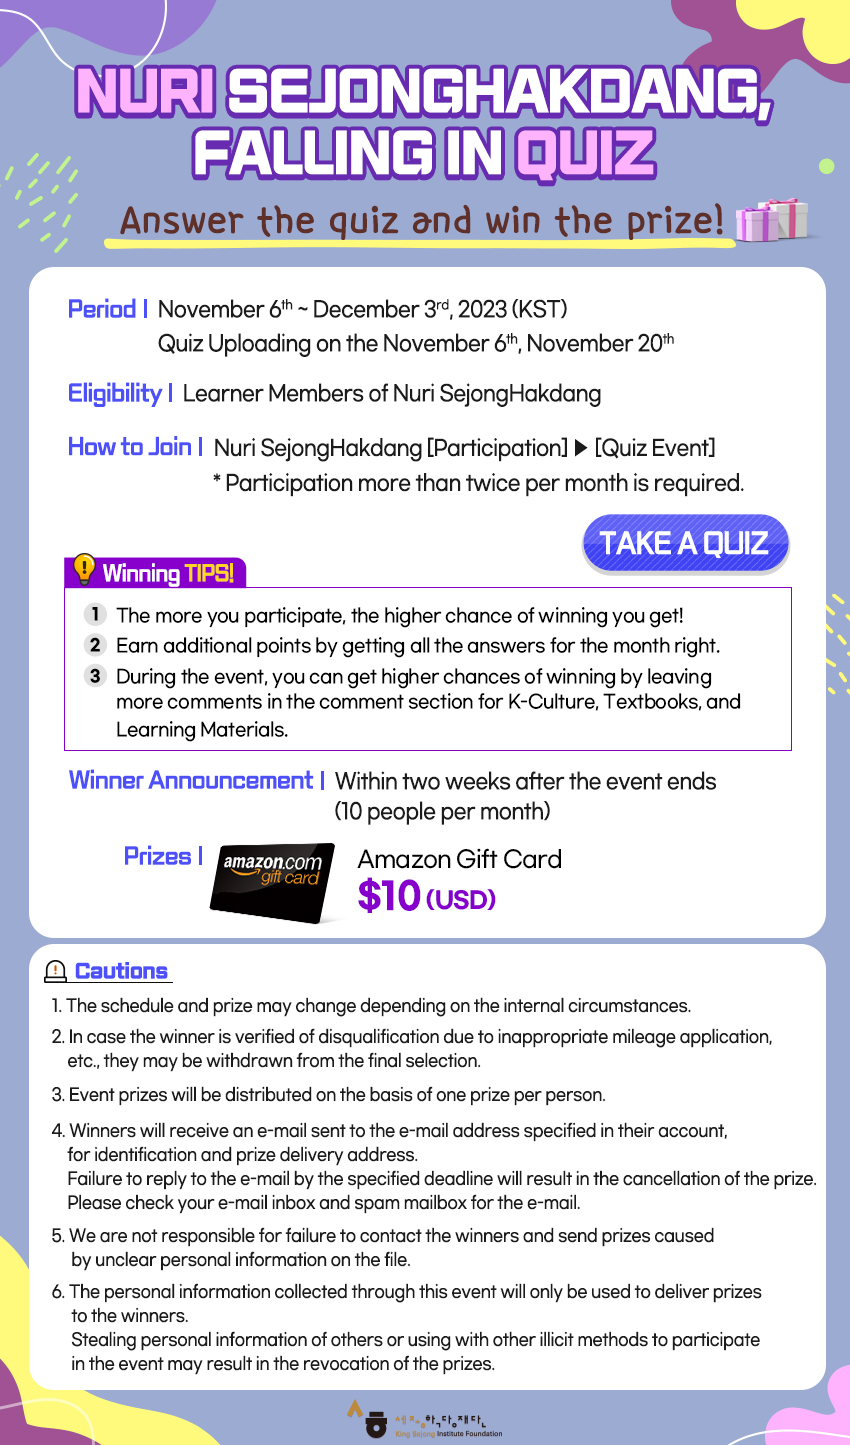 NURI SEJONGHAKDANG, FALLING IN QUIZ  Answer the quiz and win the prize!   (Period) November 6th ~ December 3rd, 2023 (KST)         Quiz Uploading on the November 6th, November 20th  (Eligibility) Learner Members of Nuri SejongHakdang  (How to Join) Nuri SejongHakdang [Participation] > [Quiz Event]               *Participation more than twice per month is required.                                                        [TAKE A QUIZ]  (Winning Tips!)  1. The more you participate, the higher chance of winning you get! 2. Earn additional points by getting all the answers for the month right. 3. During the event, you can get higher chances of winning by leaving  more comments in the comment section for K-Culture, Textboos, and Learning Materials.  (Winner Announcement)  Within two weeks after the event ends (10 people per month)  (Prizes) Amazon e-gift card $10(USD)  (Cautions) 1. The schedule and prize may change depending on the internal circumstances. 2. In case the winner is verified of disqualification due to inappropriate mileage application, etc., they may be withdrawn from the final selection. 3. Event prizes will be distributed on the basis of one prize per person. 4. Winners will receive an e-mail sent to the e-mail address specified in their account,     for identification and prize delivery address.    Failure to reply to the e-mail by the specified deadline will result in the cancellation     of the prize.    Please check your e-mail inbox and spam mailbox for the e-mail. 5. We are not responsible for failure to contact the winners and send prizes caused     by unclear personal information on the file. 6. The personal information collected through this event will only be used to deliver prizes     to the winners.    Stealing personal information of others or using with other illicit methods to participate     in the event may result in the revocation of the prizes.